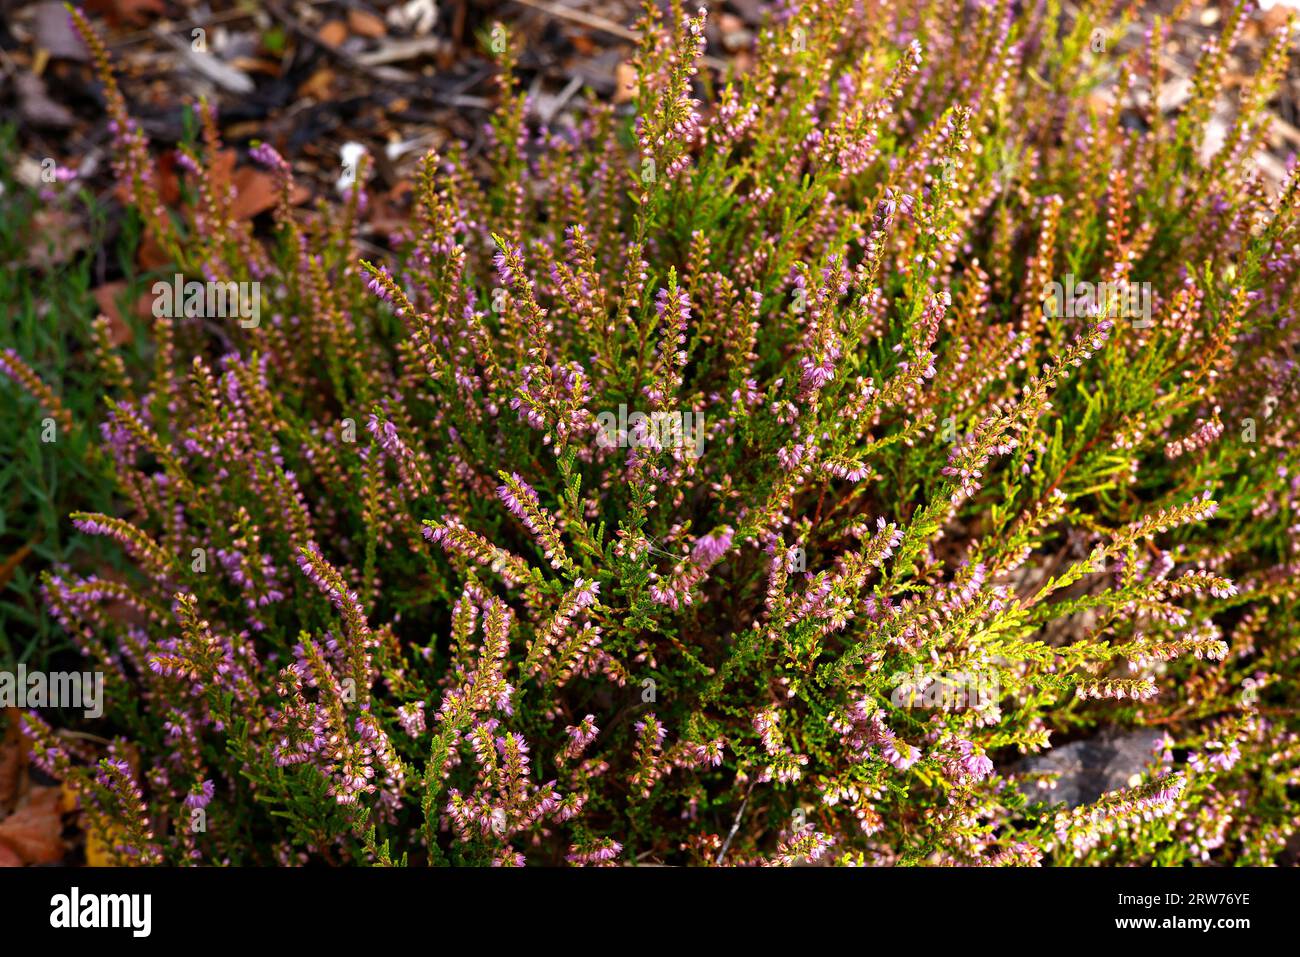 Closeup overhead view of the pink flowers and small golden leaves of the summer flowering garden heather calluna vulgaris sampford sunset. Stock Photo